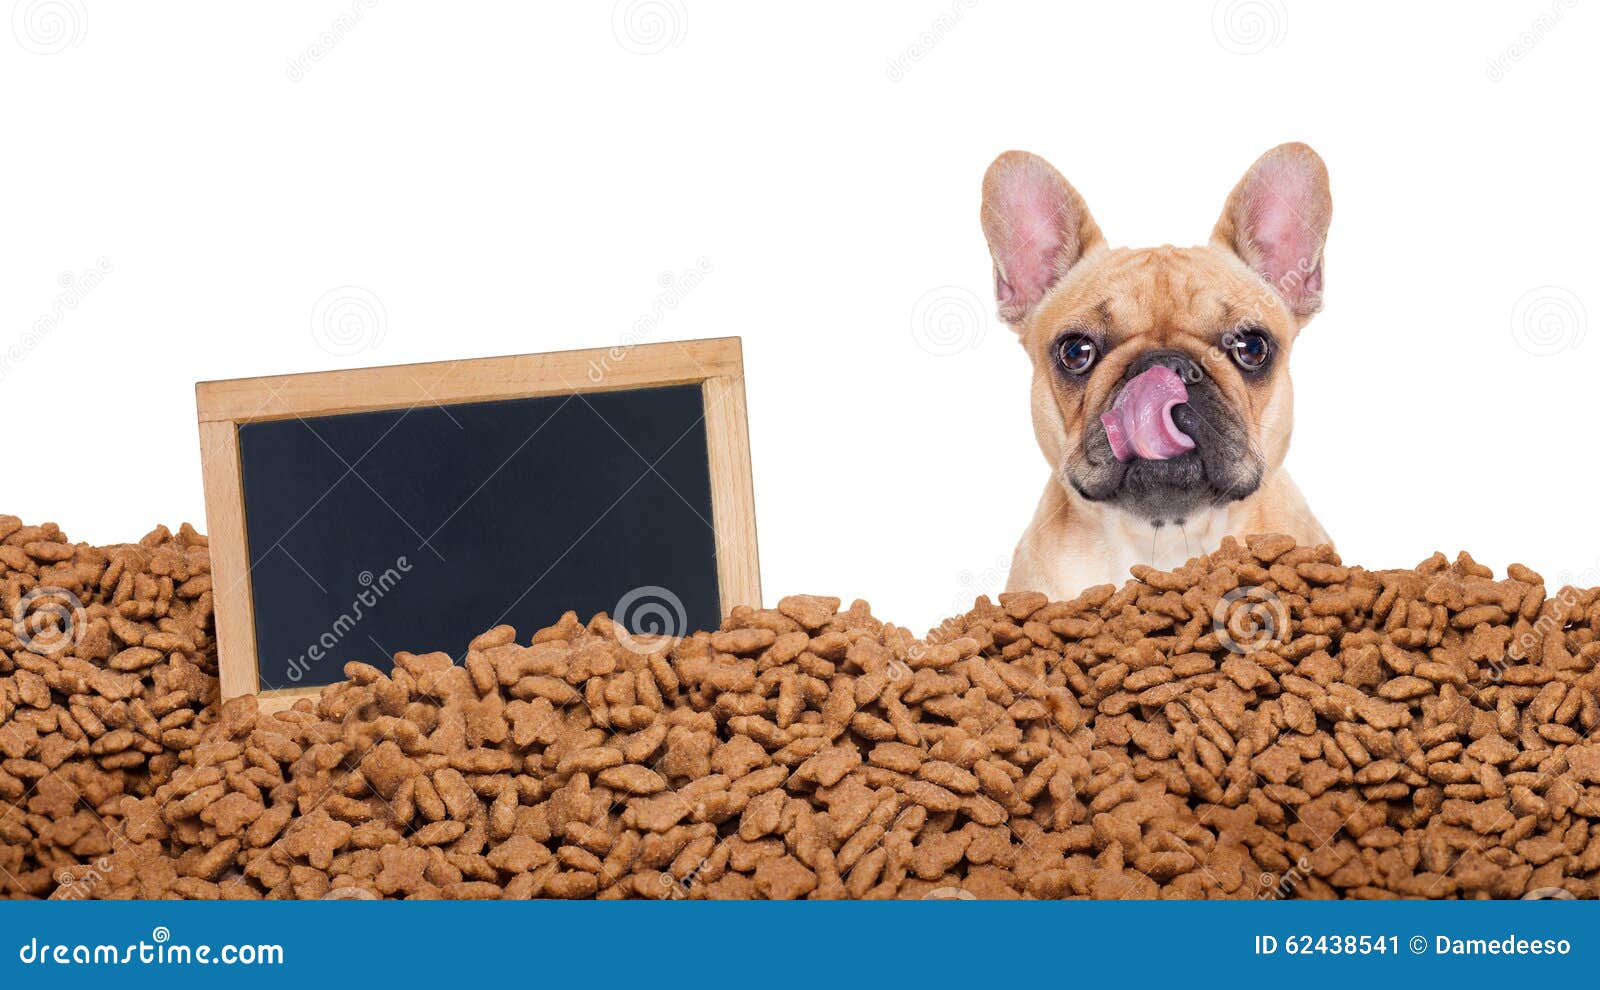 Hungry dog in a food rain stock image. Image of lunch